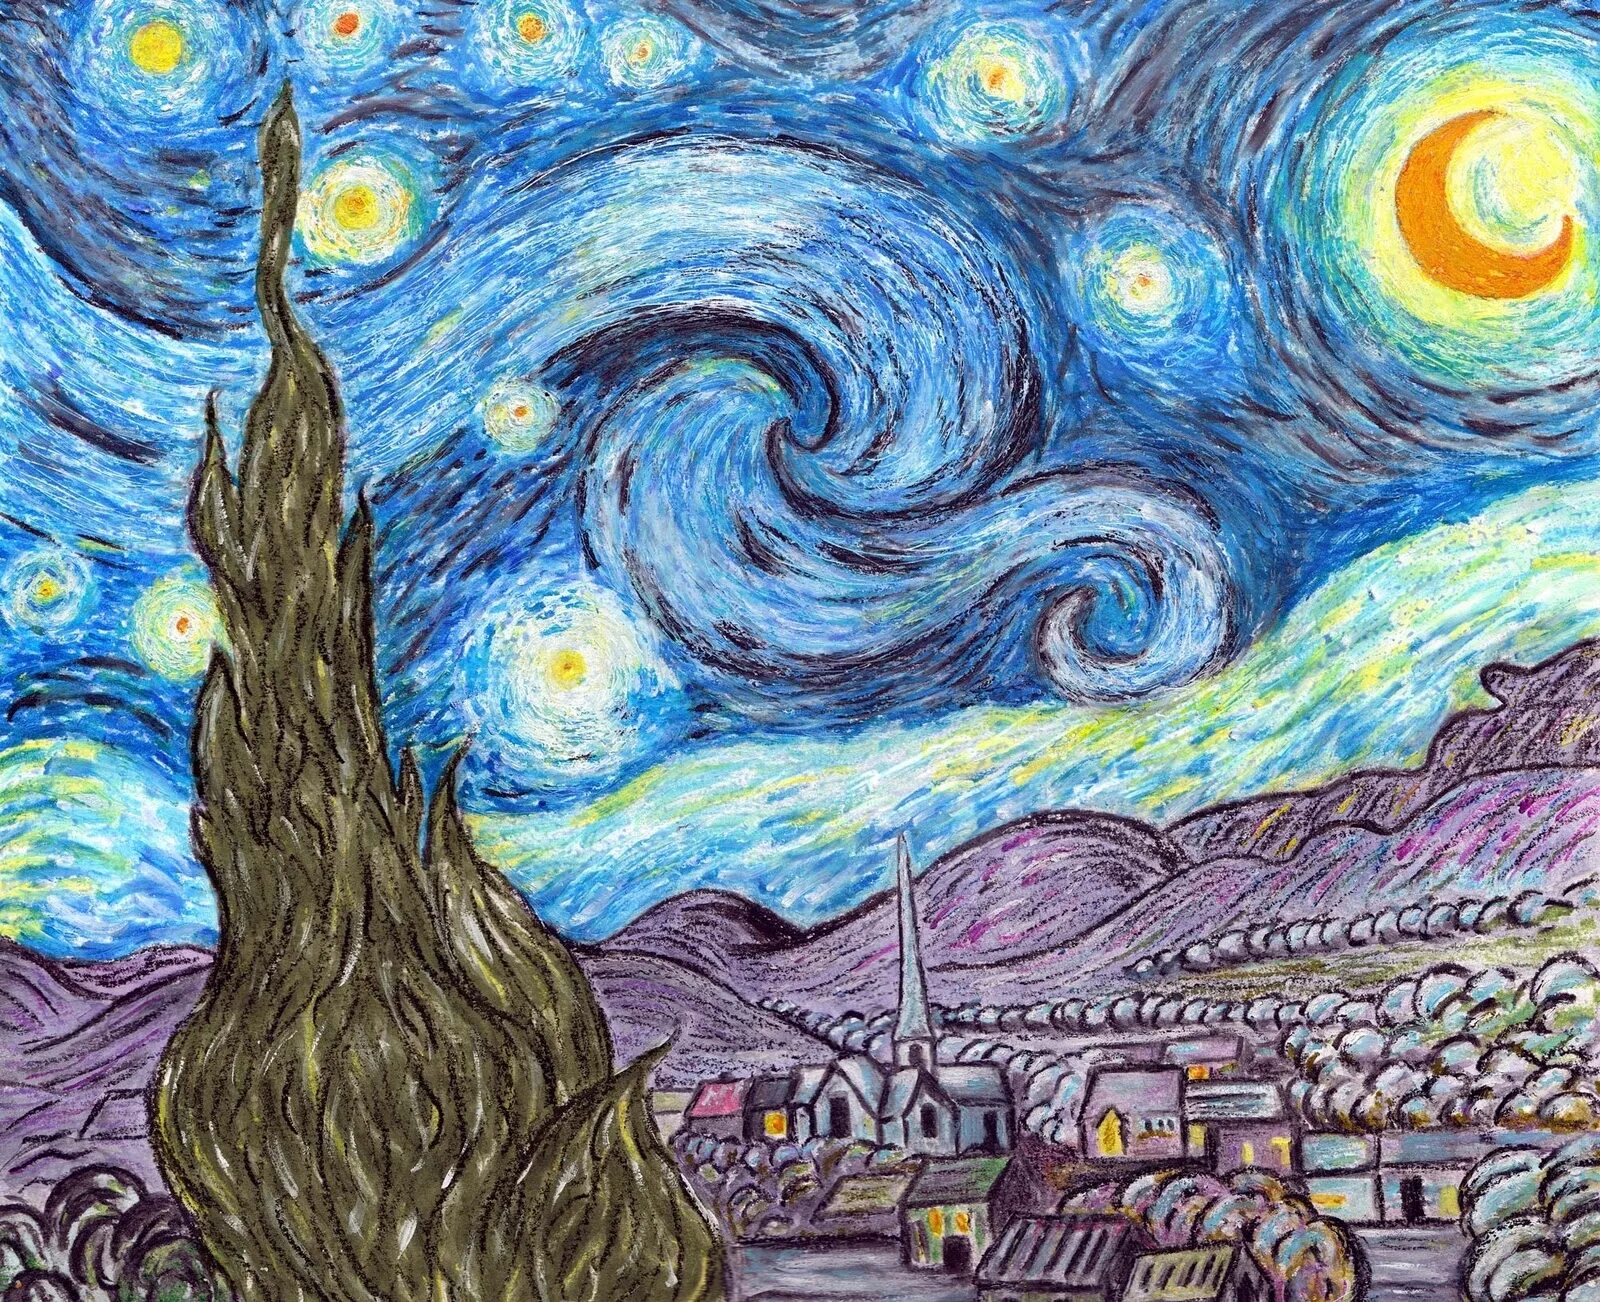 Great starry night coloring book